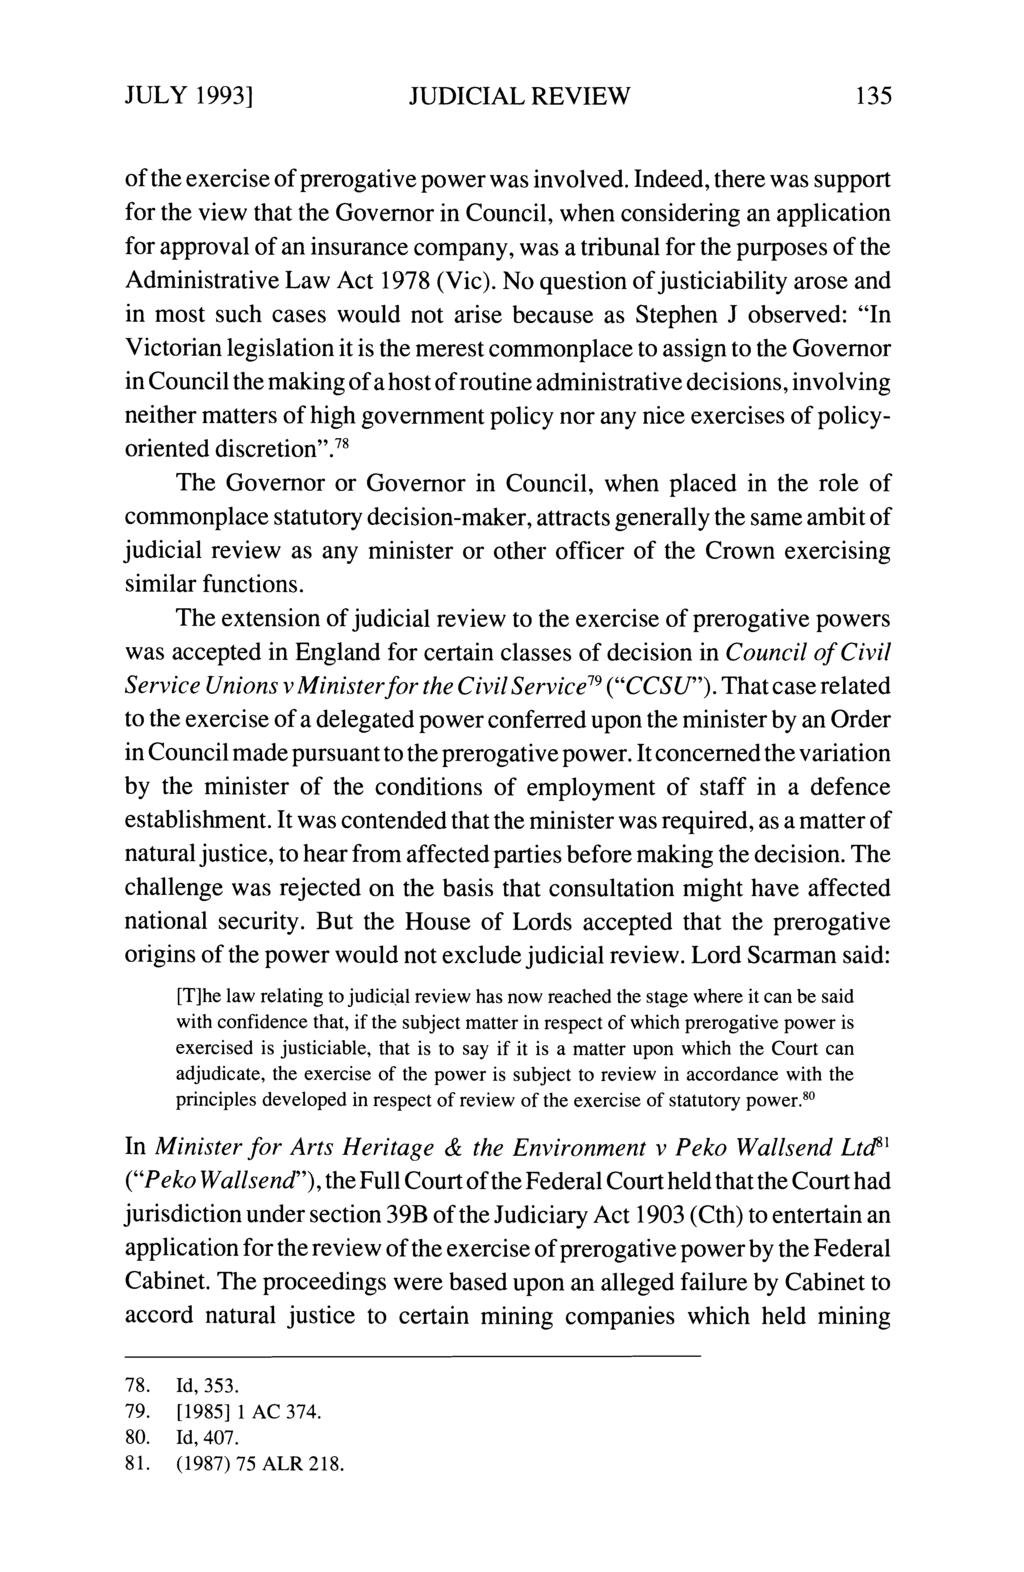 JULY 19931 JUDICIAL REVIEW of the exercise of prerogative power was involved.